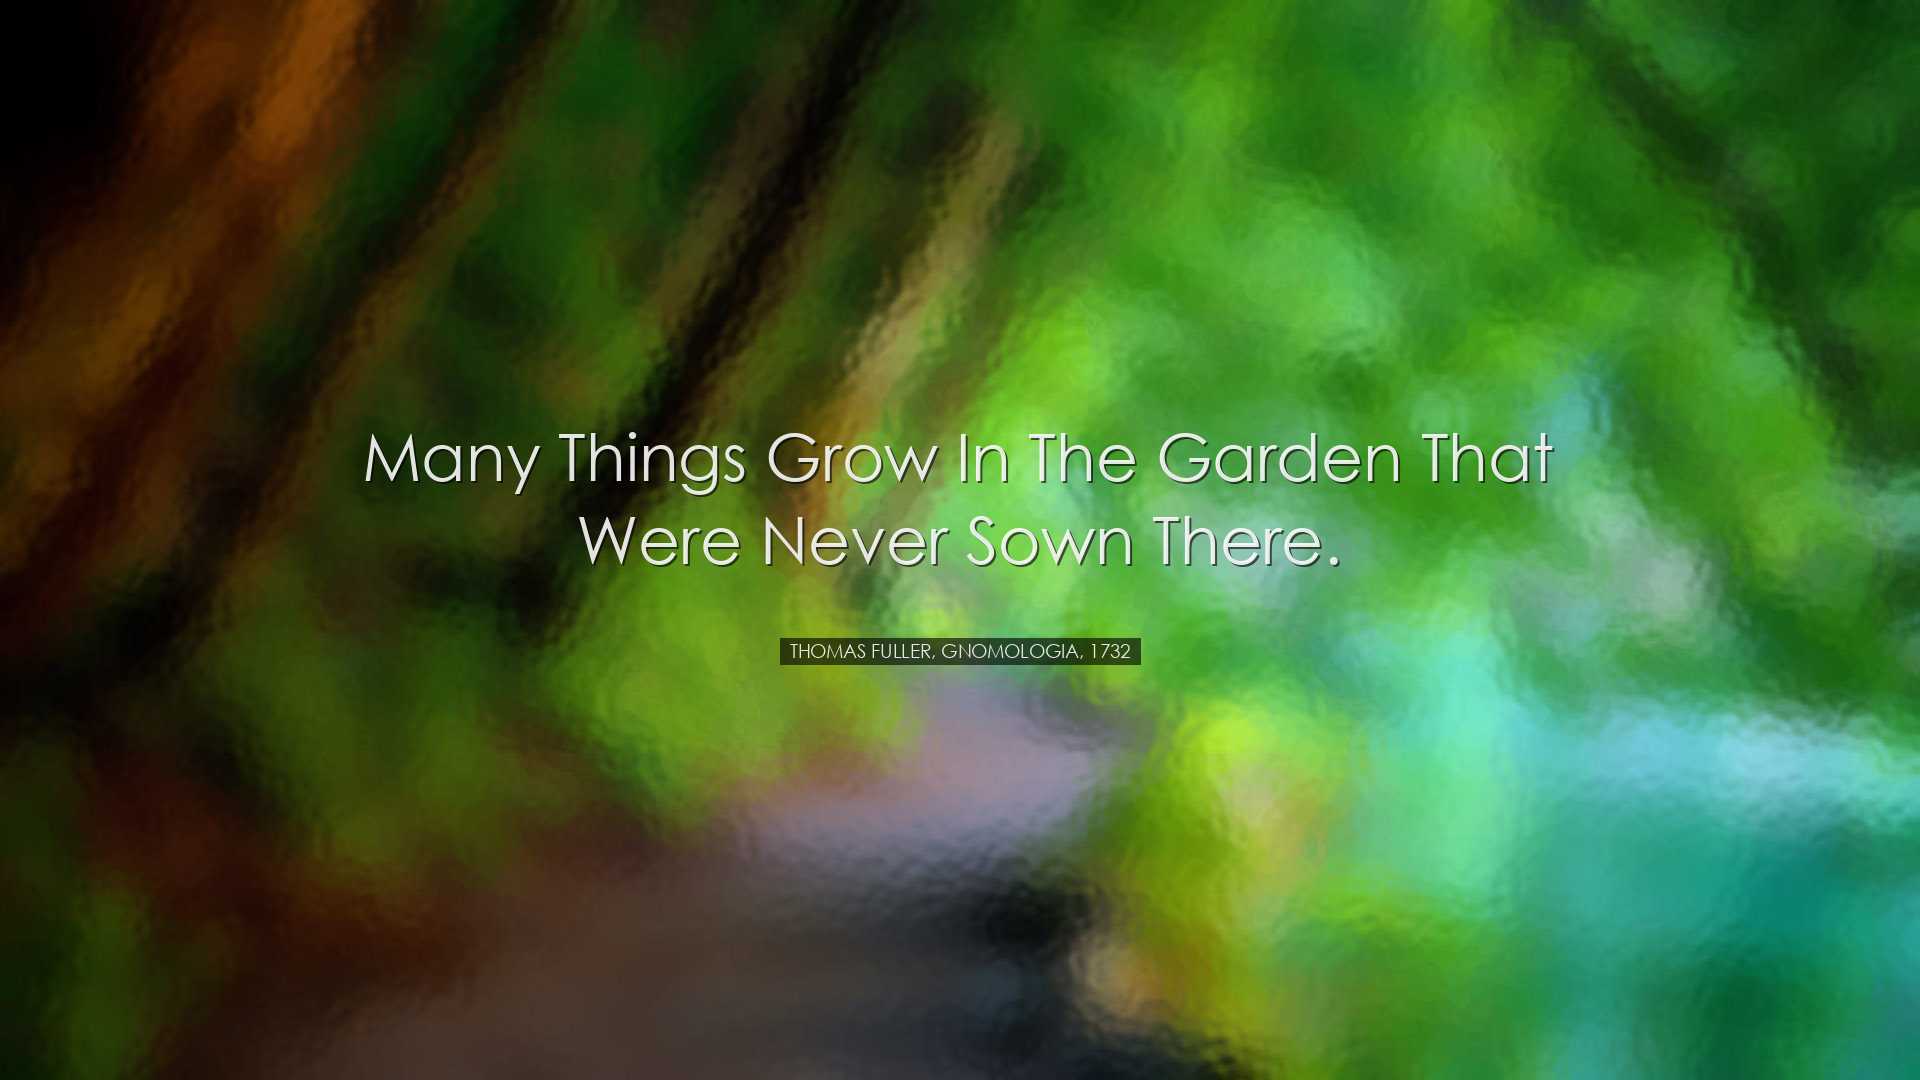 Many things grow in the garden that were never sown there. - Thoma